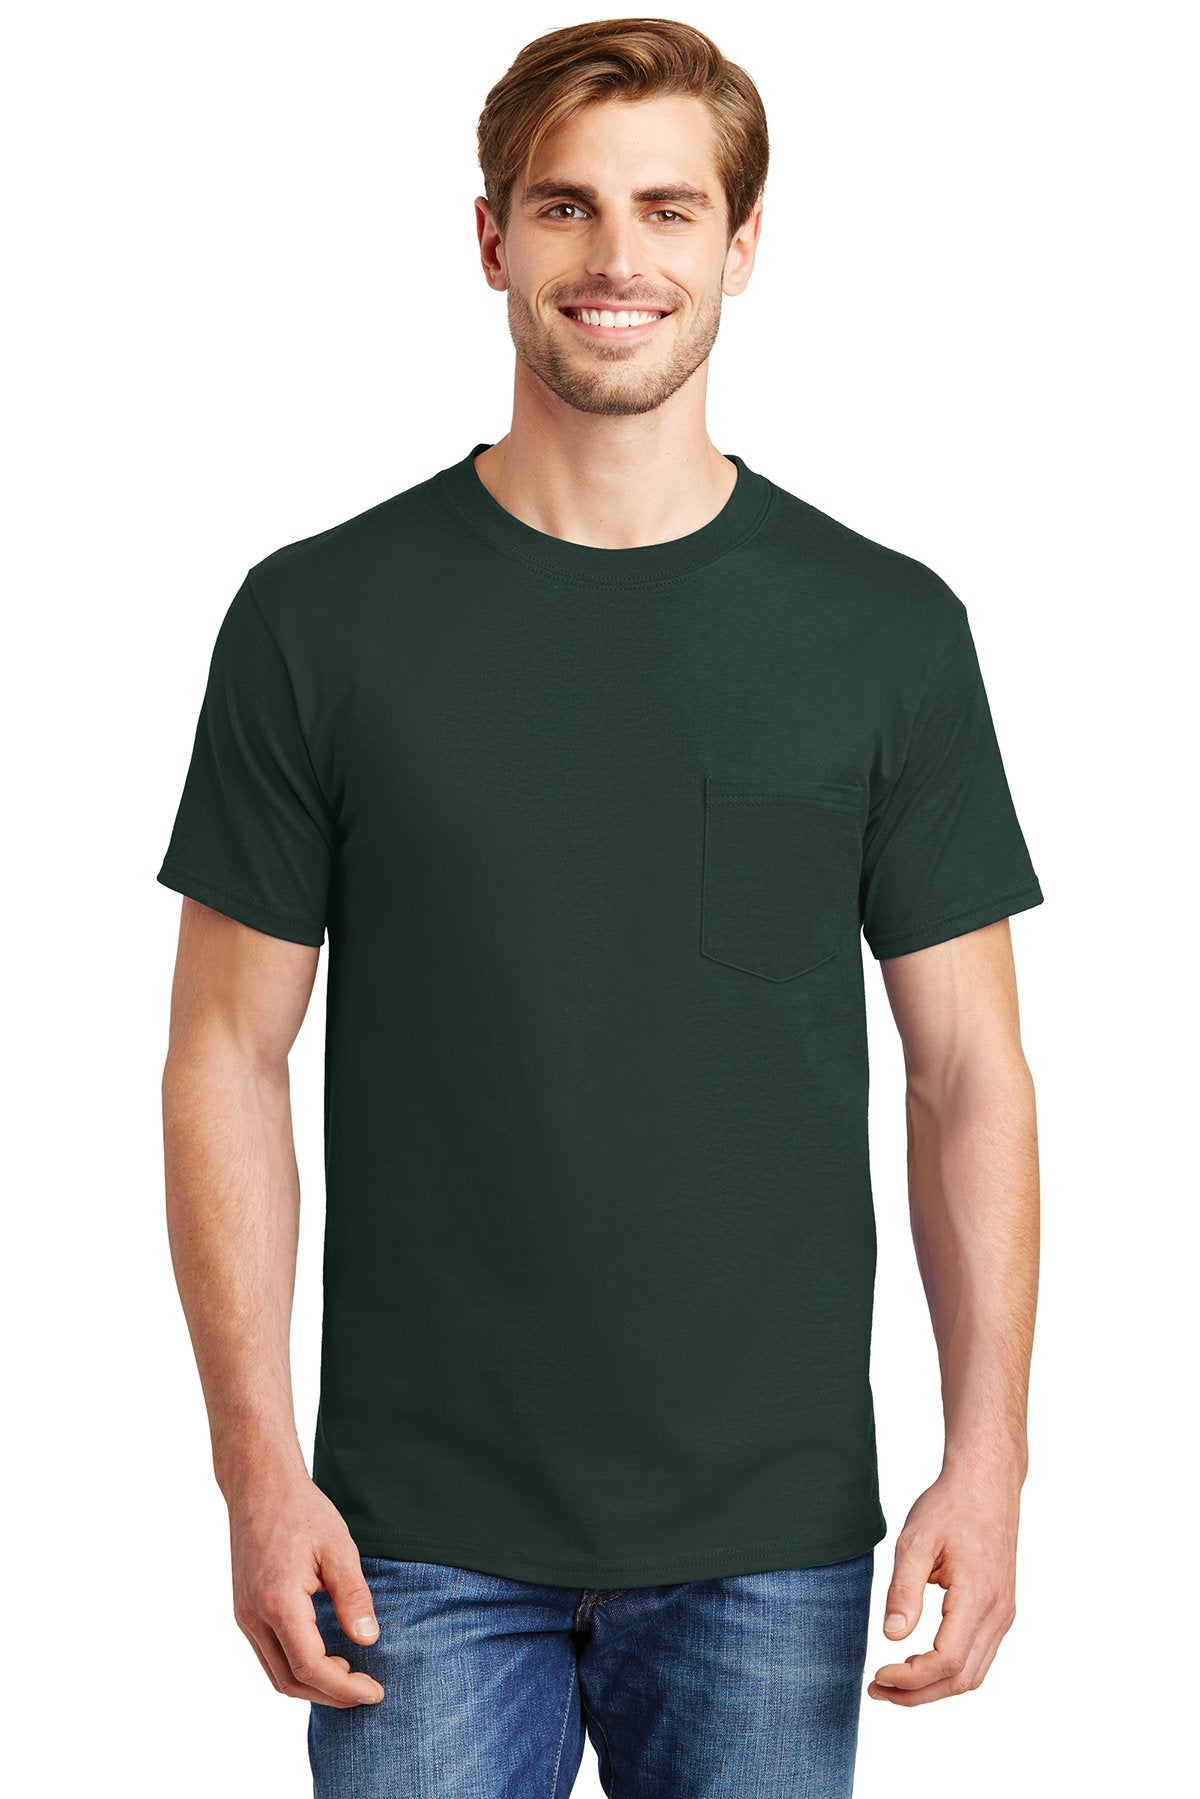 hanes beefy cotton t shirt with pocket 5190 deep forest